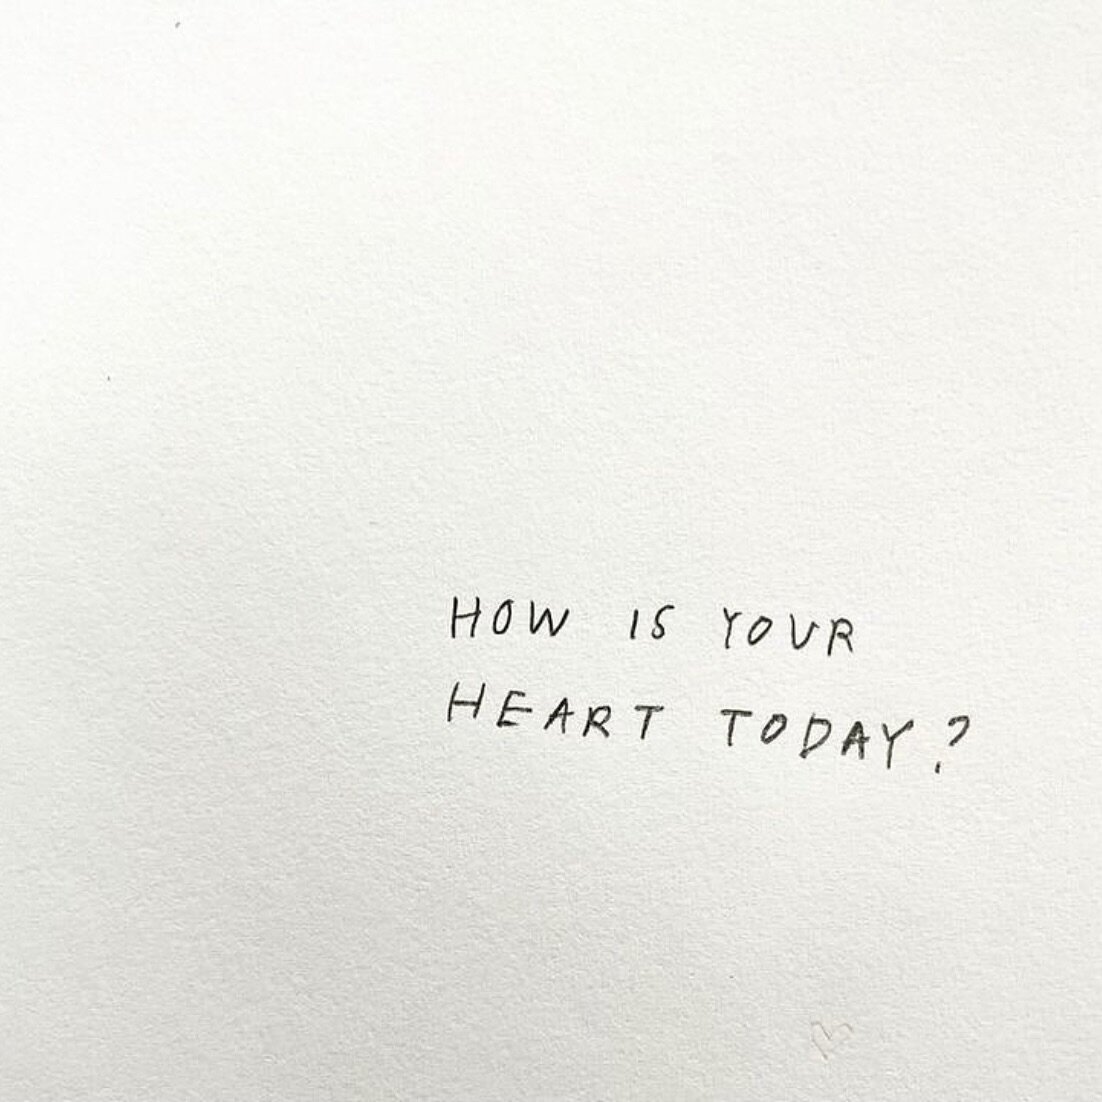 How is your heart today ?